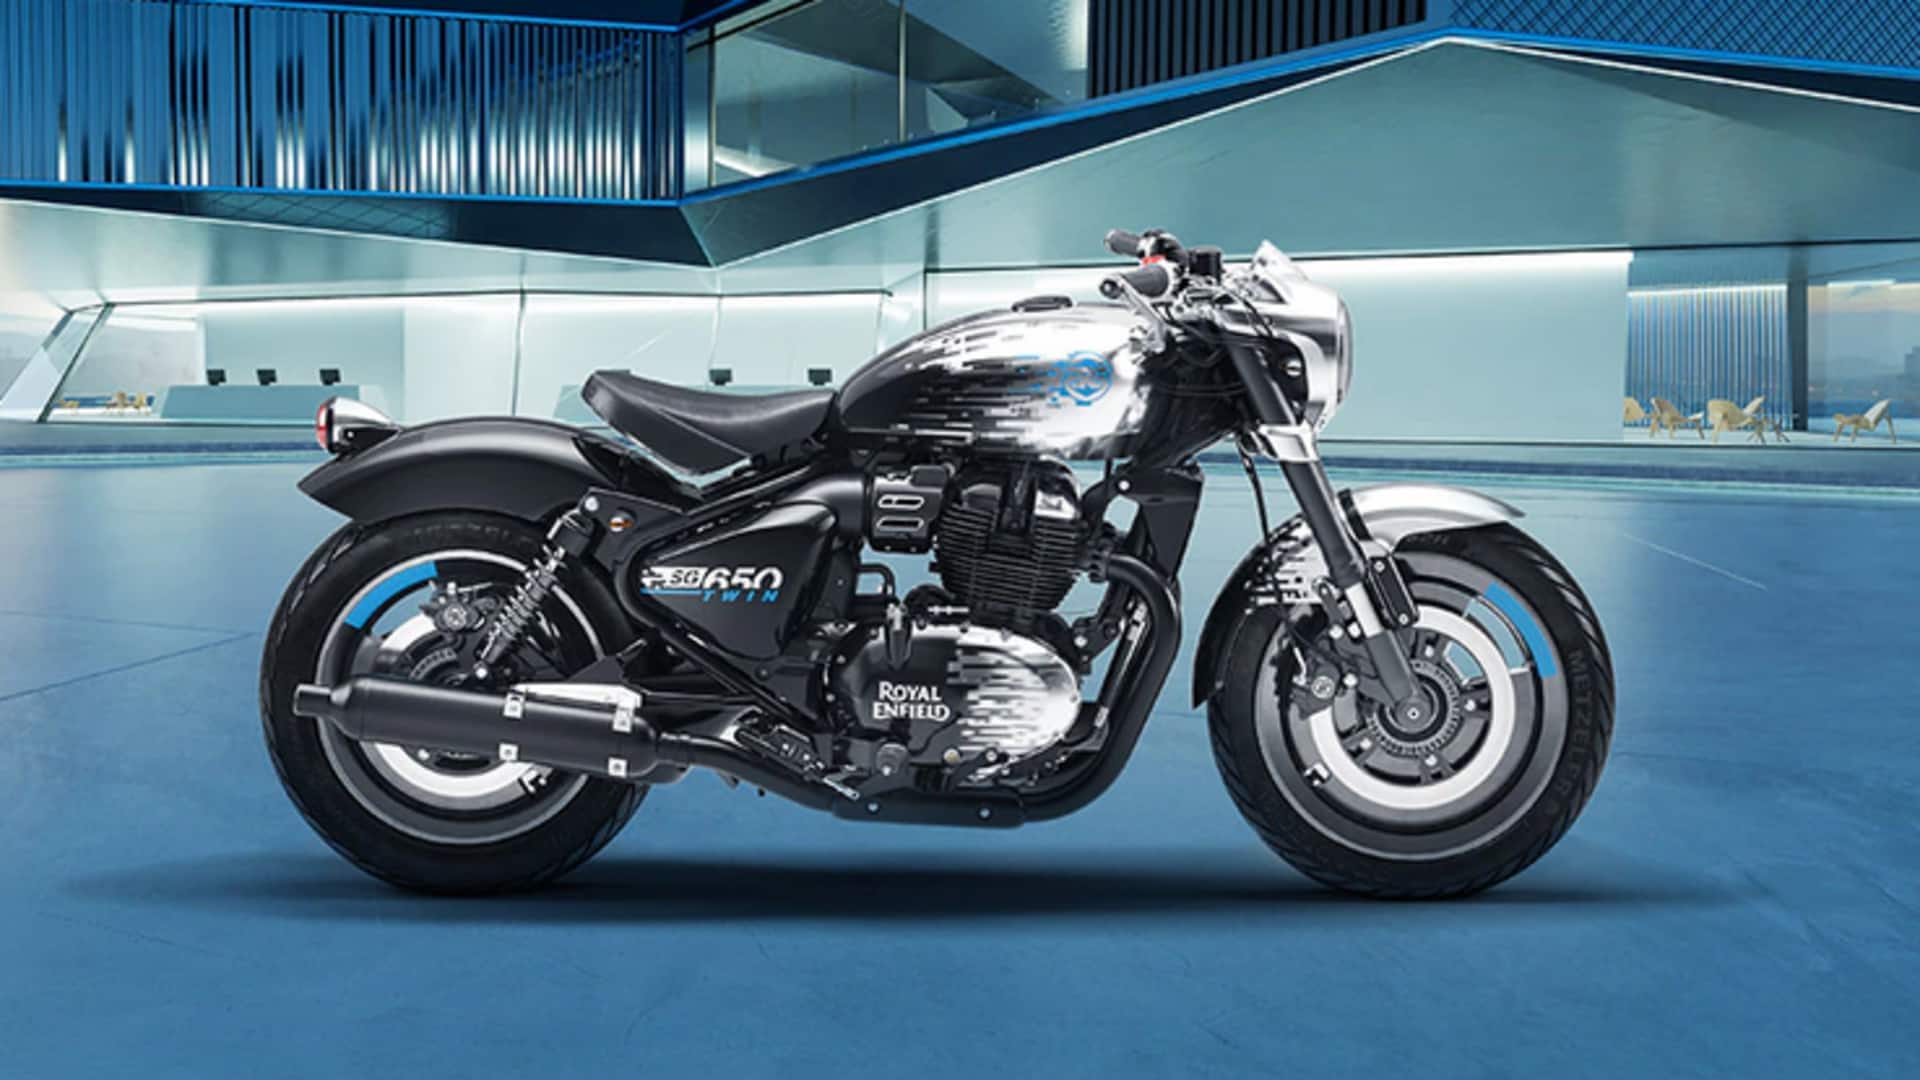 Prior to debut, Royal Enfield Shotgun 650's specifications revealed